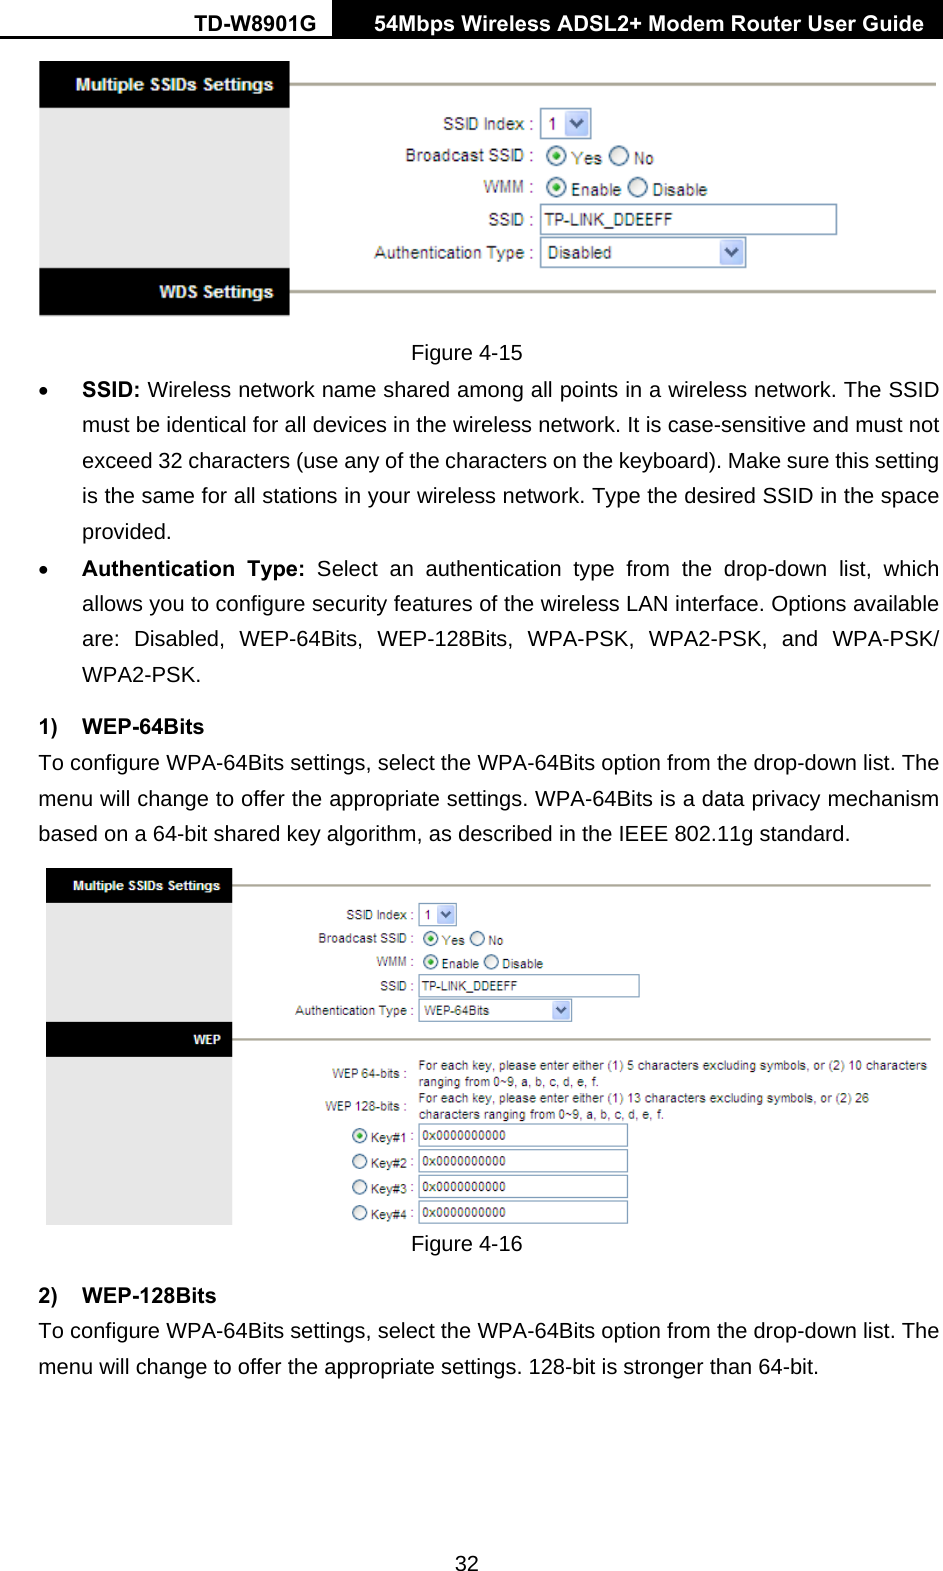 TD-W8901G   54Mbps Wireless ADSL2+ Modem Router User Guide 32  Figure 4-15 • SSID: Wireless network name shared among all points in a wireless network. The SSID must be identical for all devices in the wireless network. It is case-sensitive and must not exceed 32 characters (use any of the characters on the keyboard). Make sure this setting is the same for all stations in your wireless network. Type the desired SSID in the space provided. • Authentication Type: Select an authentication type from the drop-down list, which allows you to configure security features of the wireless LAN interface. Options available are: Disabled, WEP-64Bits, WEP-128Bits, WPA-PSK, WPA2-PSK, and WPA-PSK/ WPA2-PSK.  1) WEP-64Bits To configure WPA-64Bits settings, select the WPA-64Bits option from the drop-down list. The menu will change to offer the appropriate settings. WPA-64Bits is a data privacy mechanism based on a 64-bit shared key algorithm, as described in the IEEE 802.11g standard.  Figure 4-16 2) WEP-128Bits To configure WPA-64Bits settings, select the WPA-64Bits option from the drop-down list. The menu will change to offer the appropriate settings. 128-bit is stronger than 64-bit. 